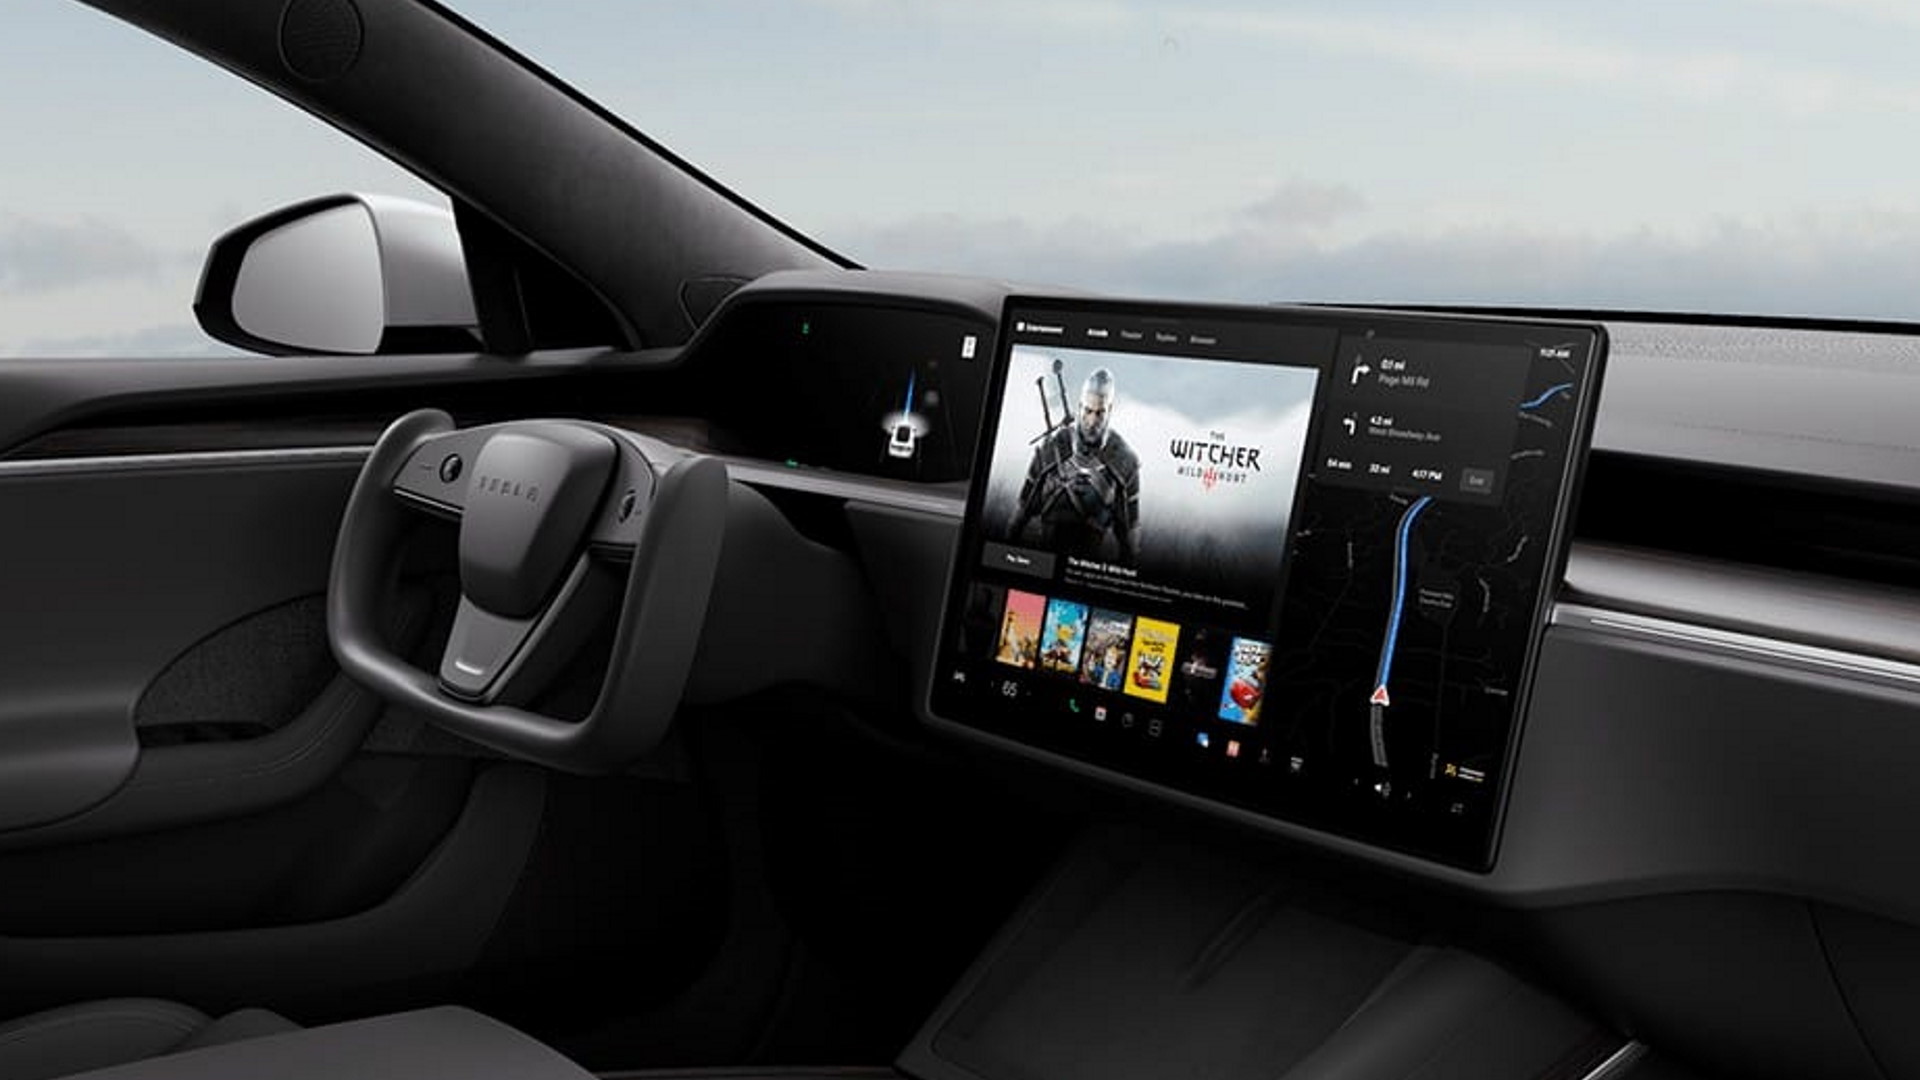  Tesla wants its cars to be Steam compatible 